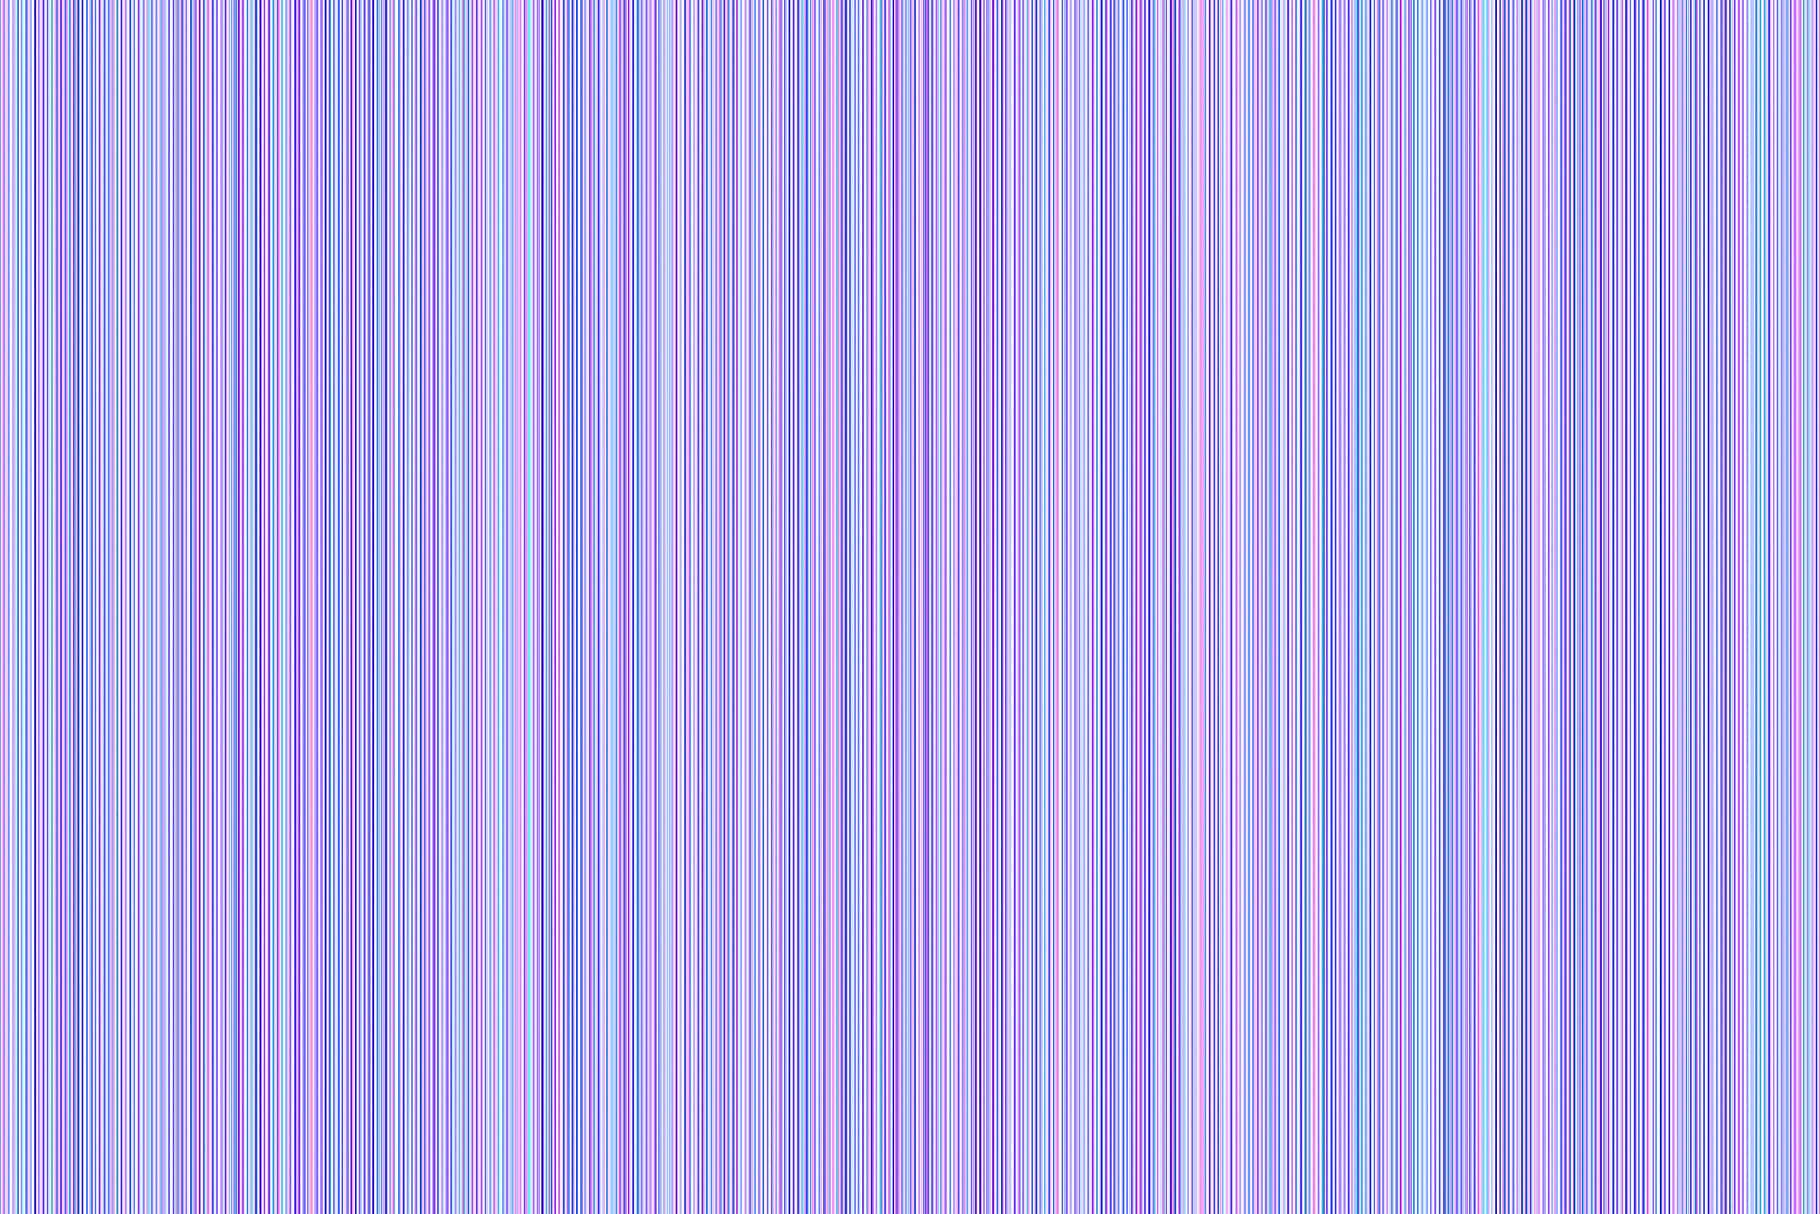 A Purple And Blue Striped Background